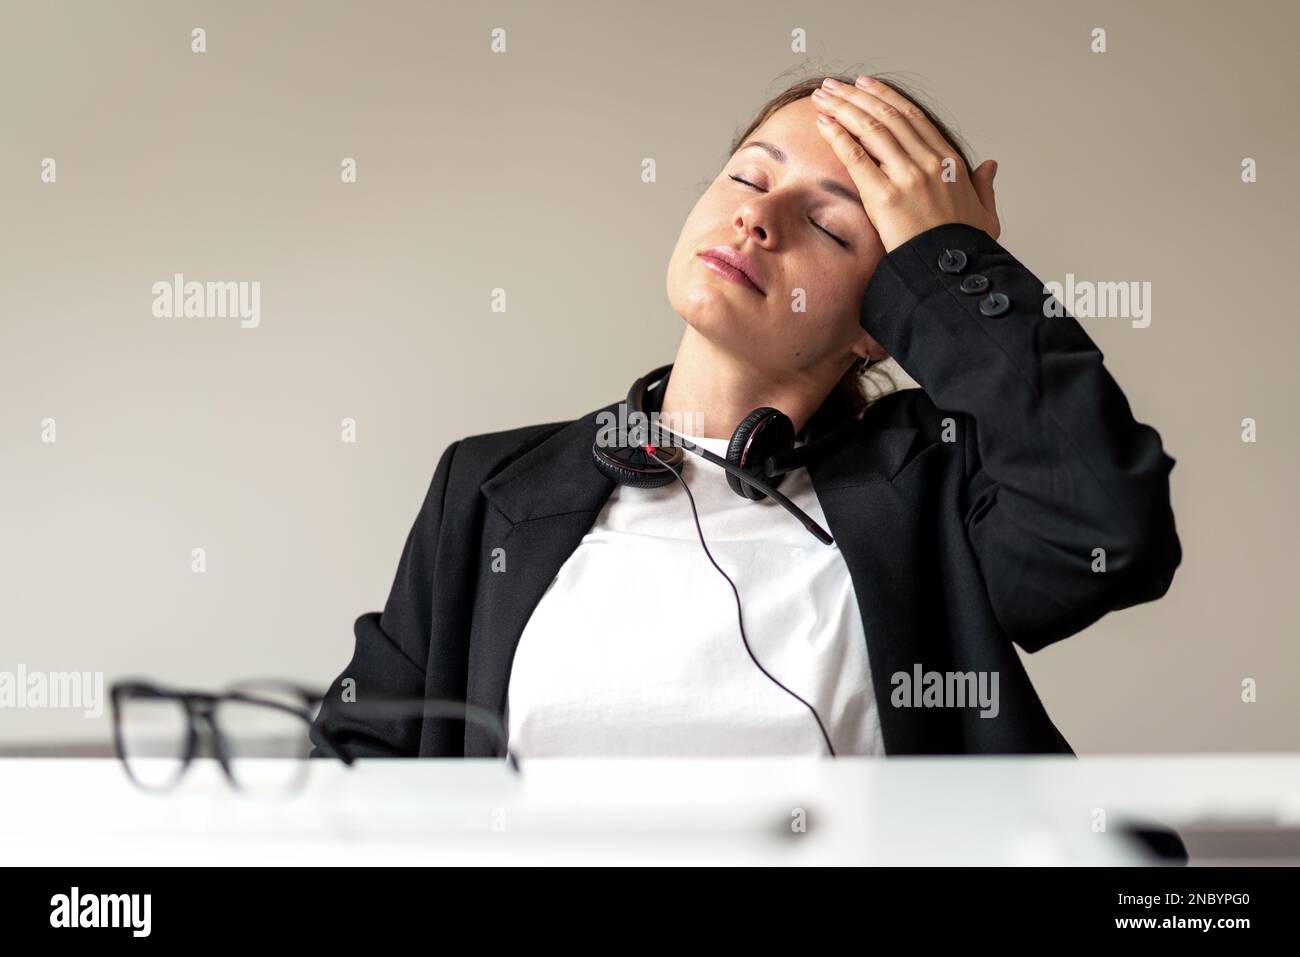 Woman office worker sitting at desk has headache touching forehead with her hand, feeling unwell at work. Stock Photo